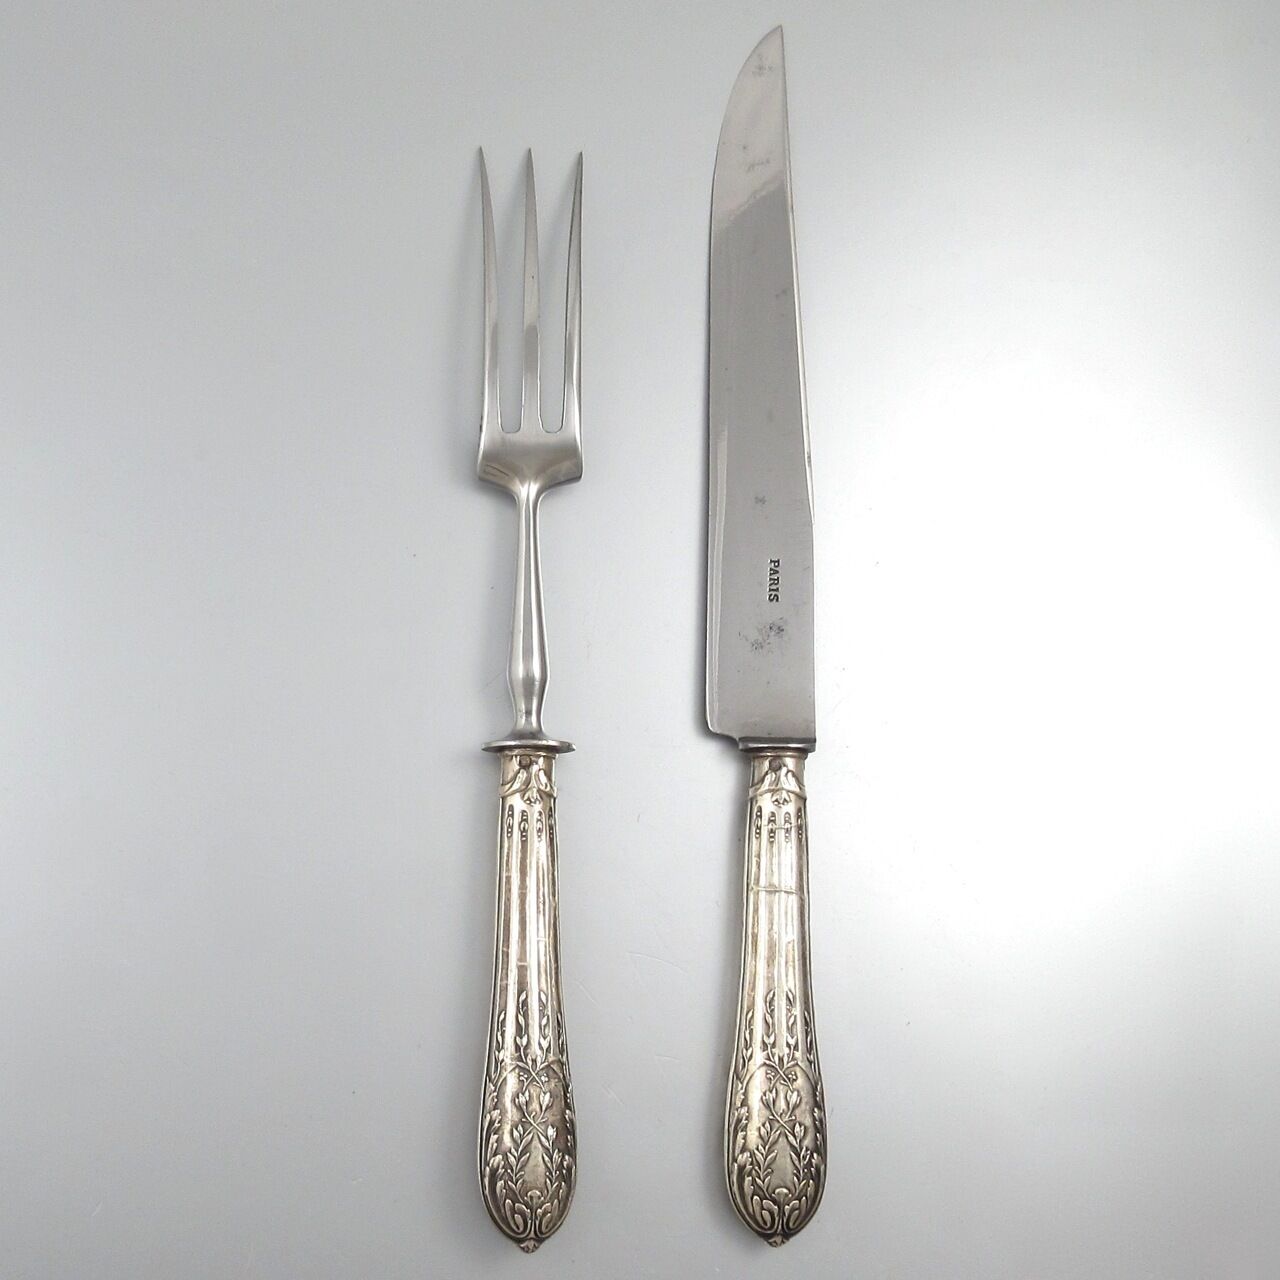 Antique French Silver Clad Carving Set, Fork and Knife, Neoclassic, Paris